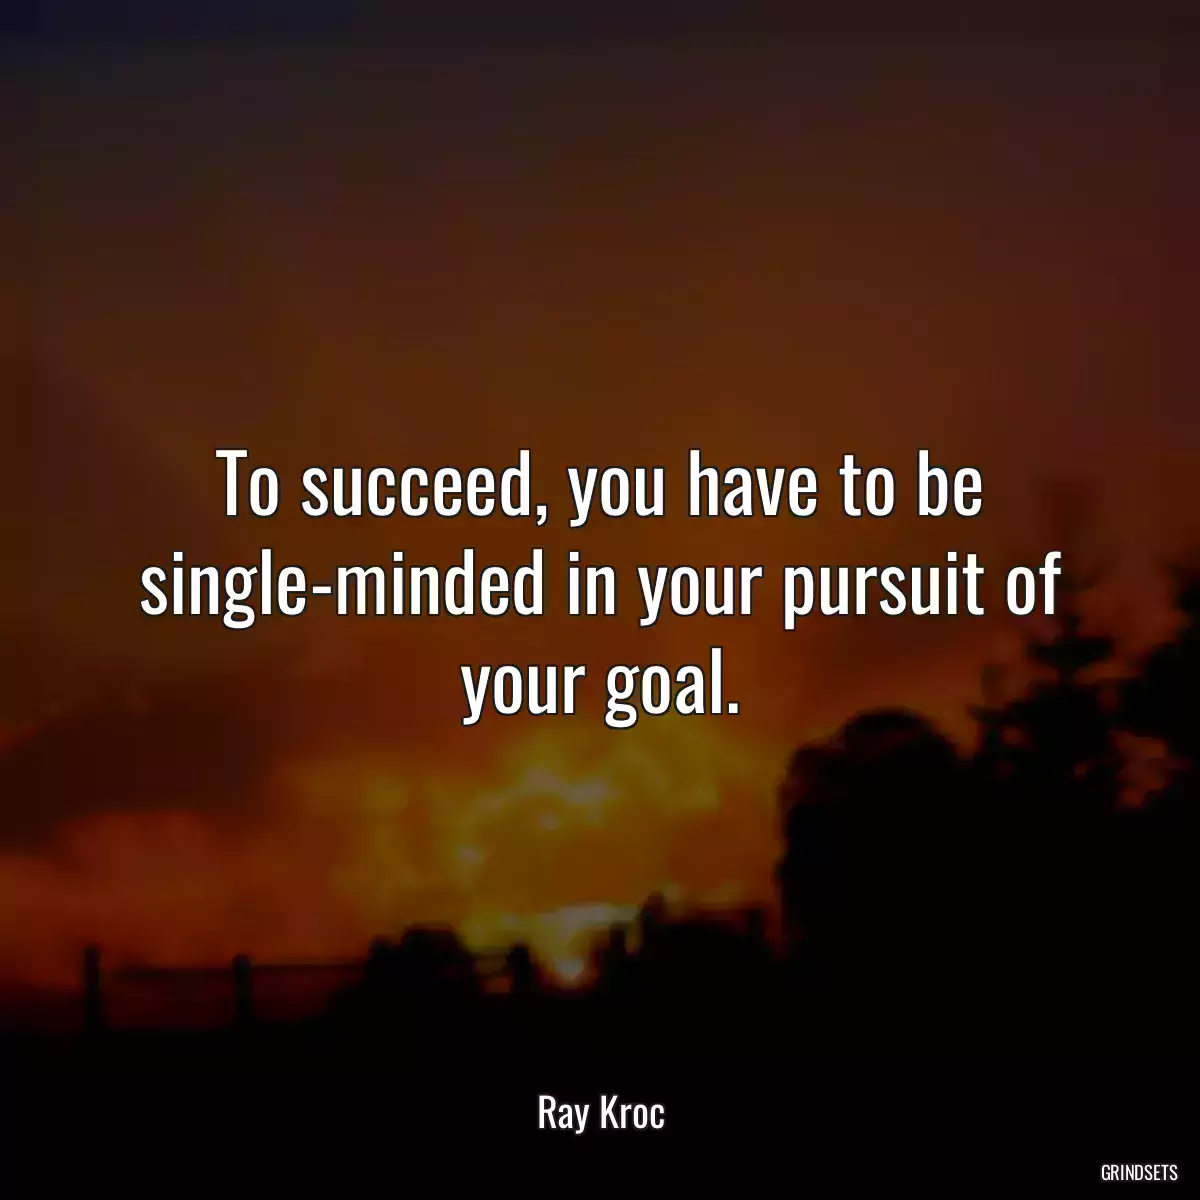 To succeed, you have to be single-minded in your pursuit of your goal.